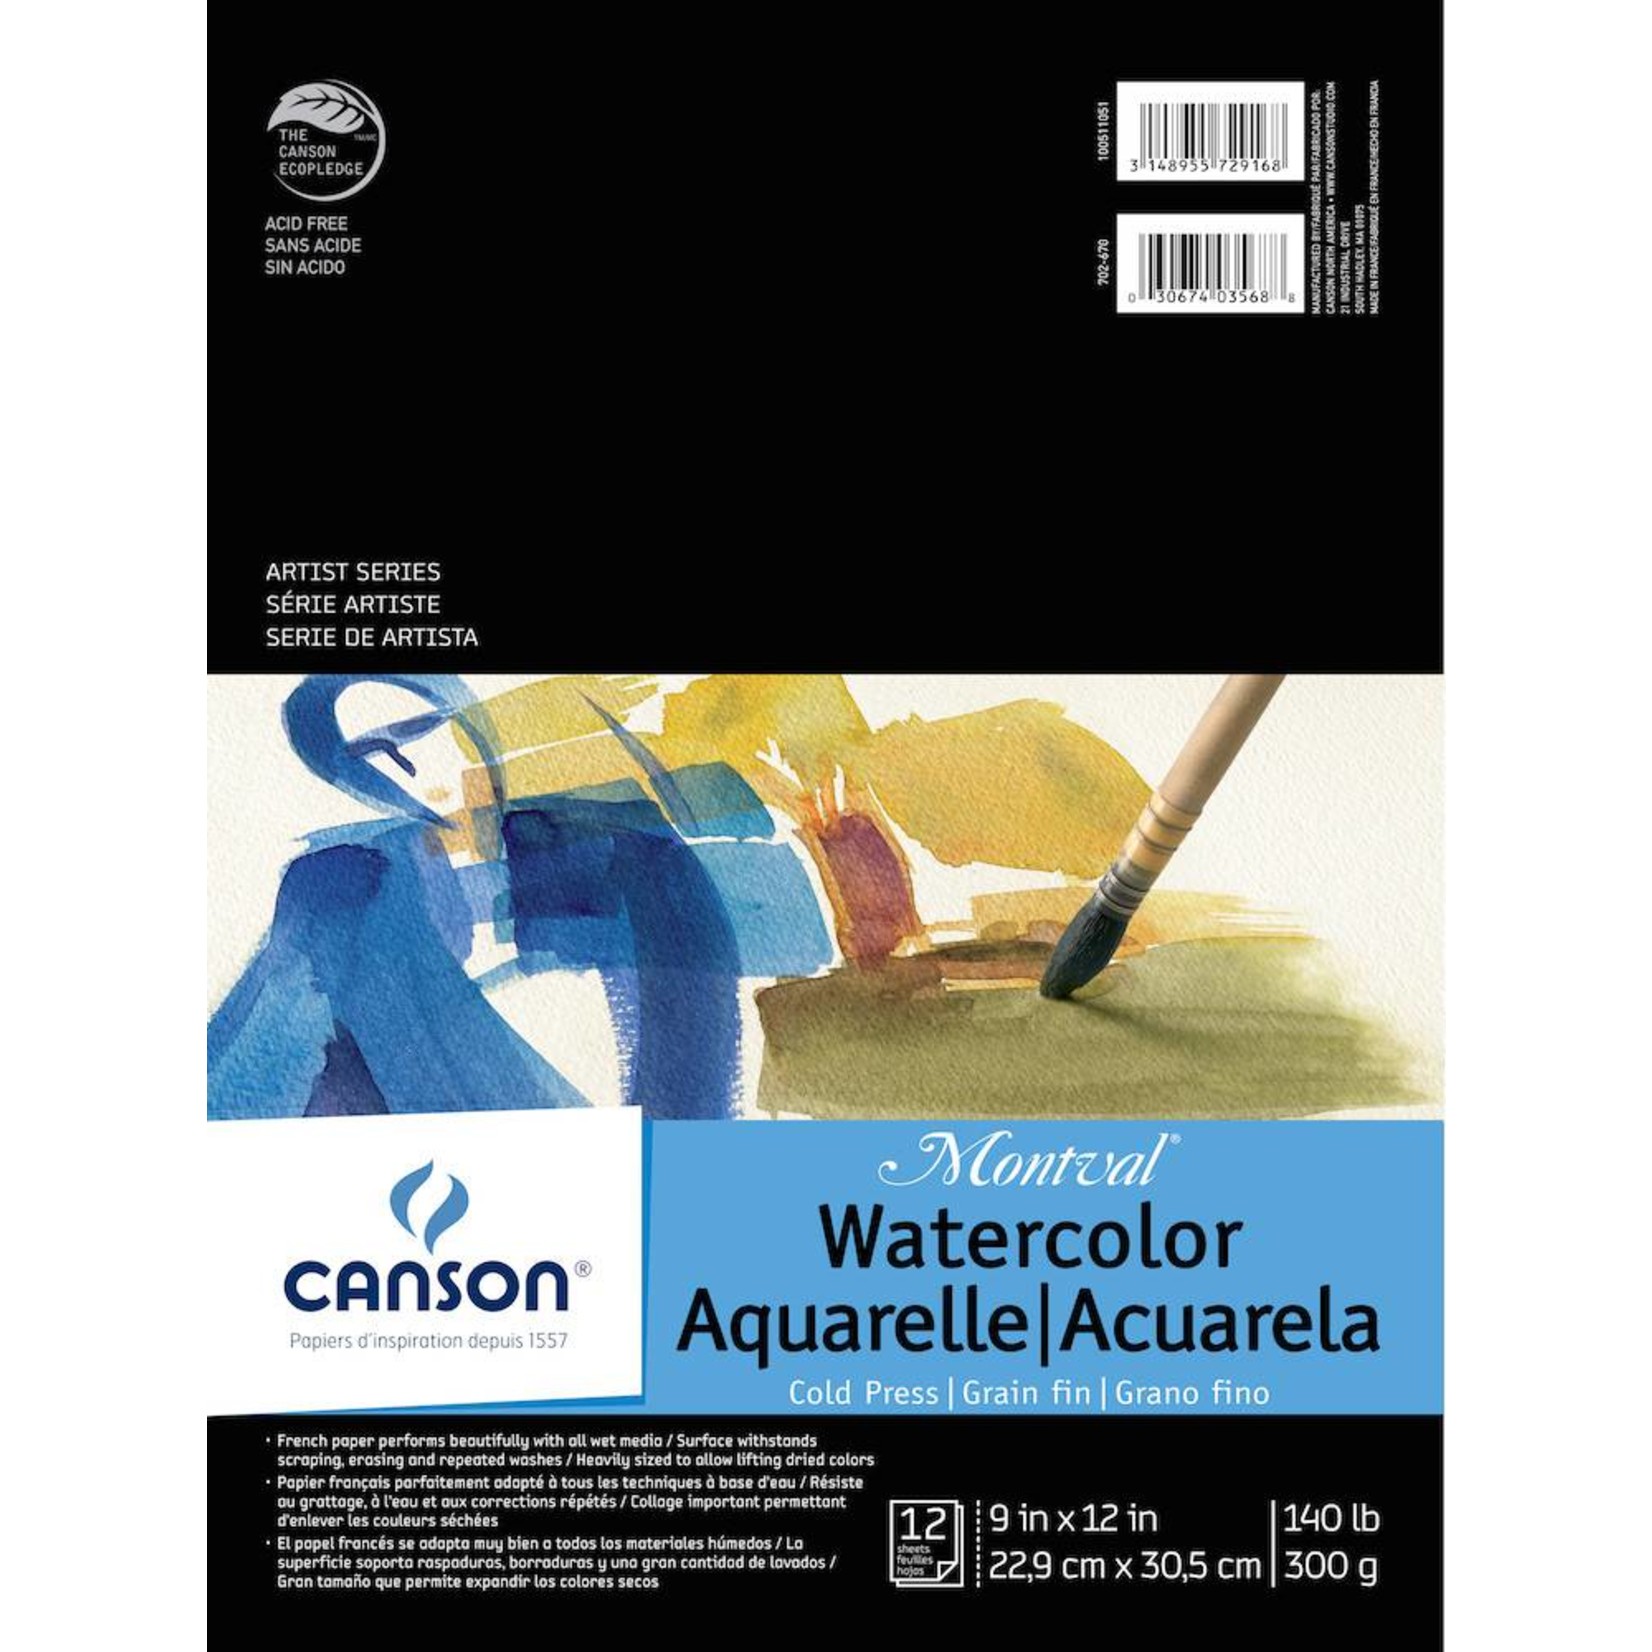 CANSON CANSON MONTVAL WATERCOLOUR PAD 140LB CP 9X12 TAPE BOUND  12/SHT    CAN-100511051